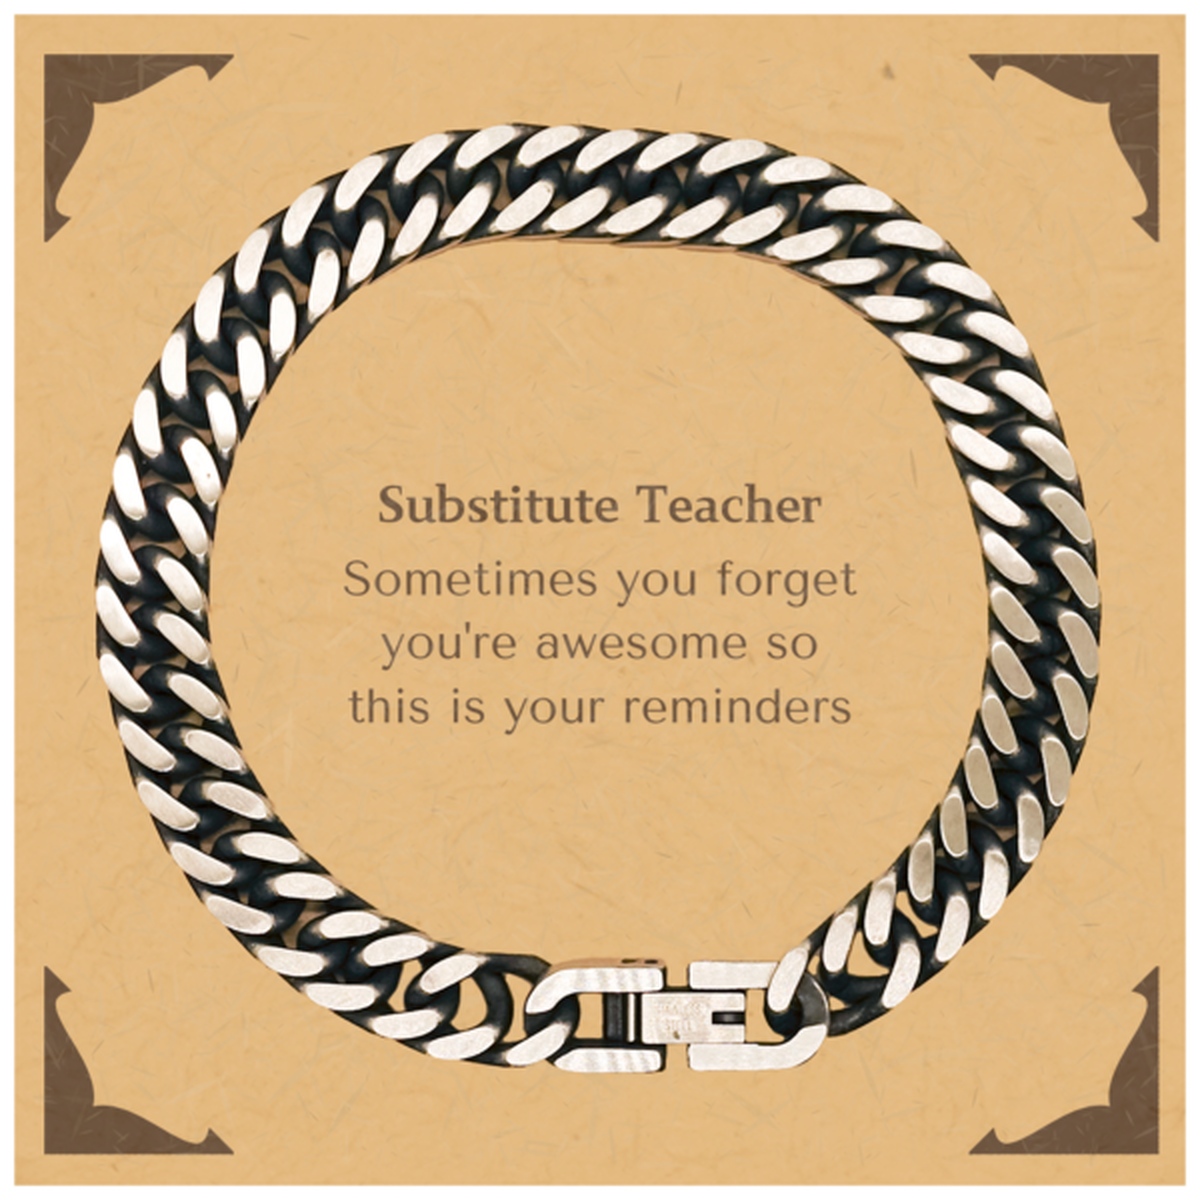 Sentimental Substitute Teacher Cuban Link Chain Bracelet, Substitute Teacher Sometimes you forget you're awesome so this is your reminders, Graduation Christmas Birthday Gifts for Substitute Teacher, Men, Women, Coworkers